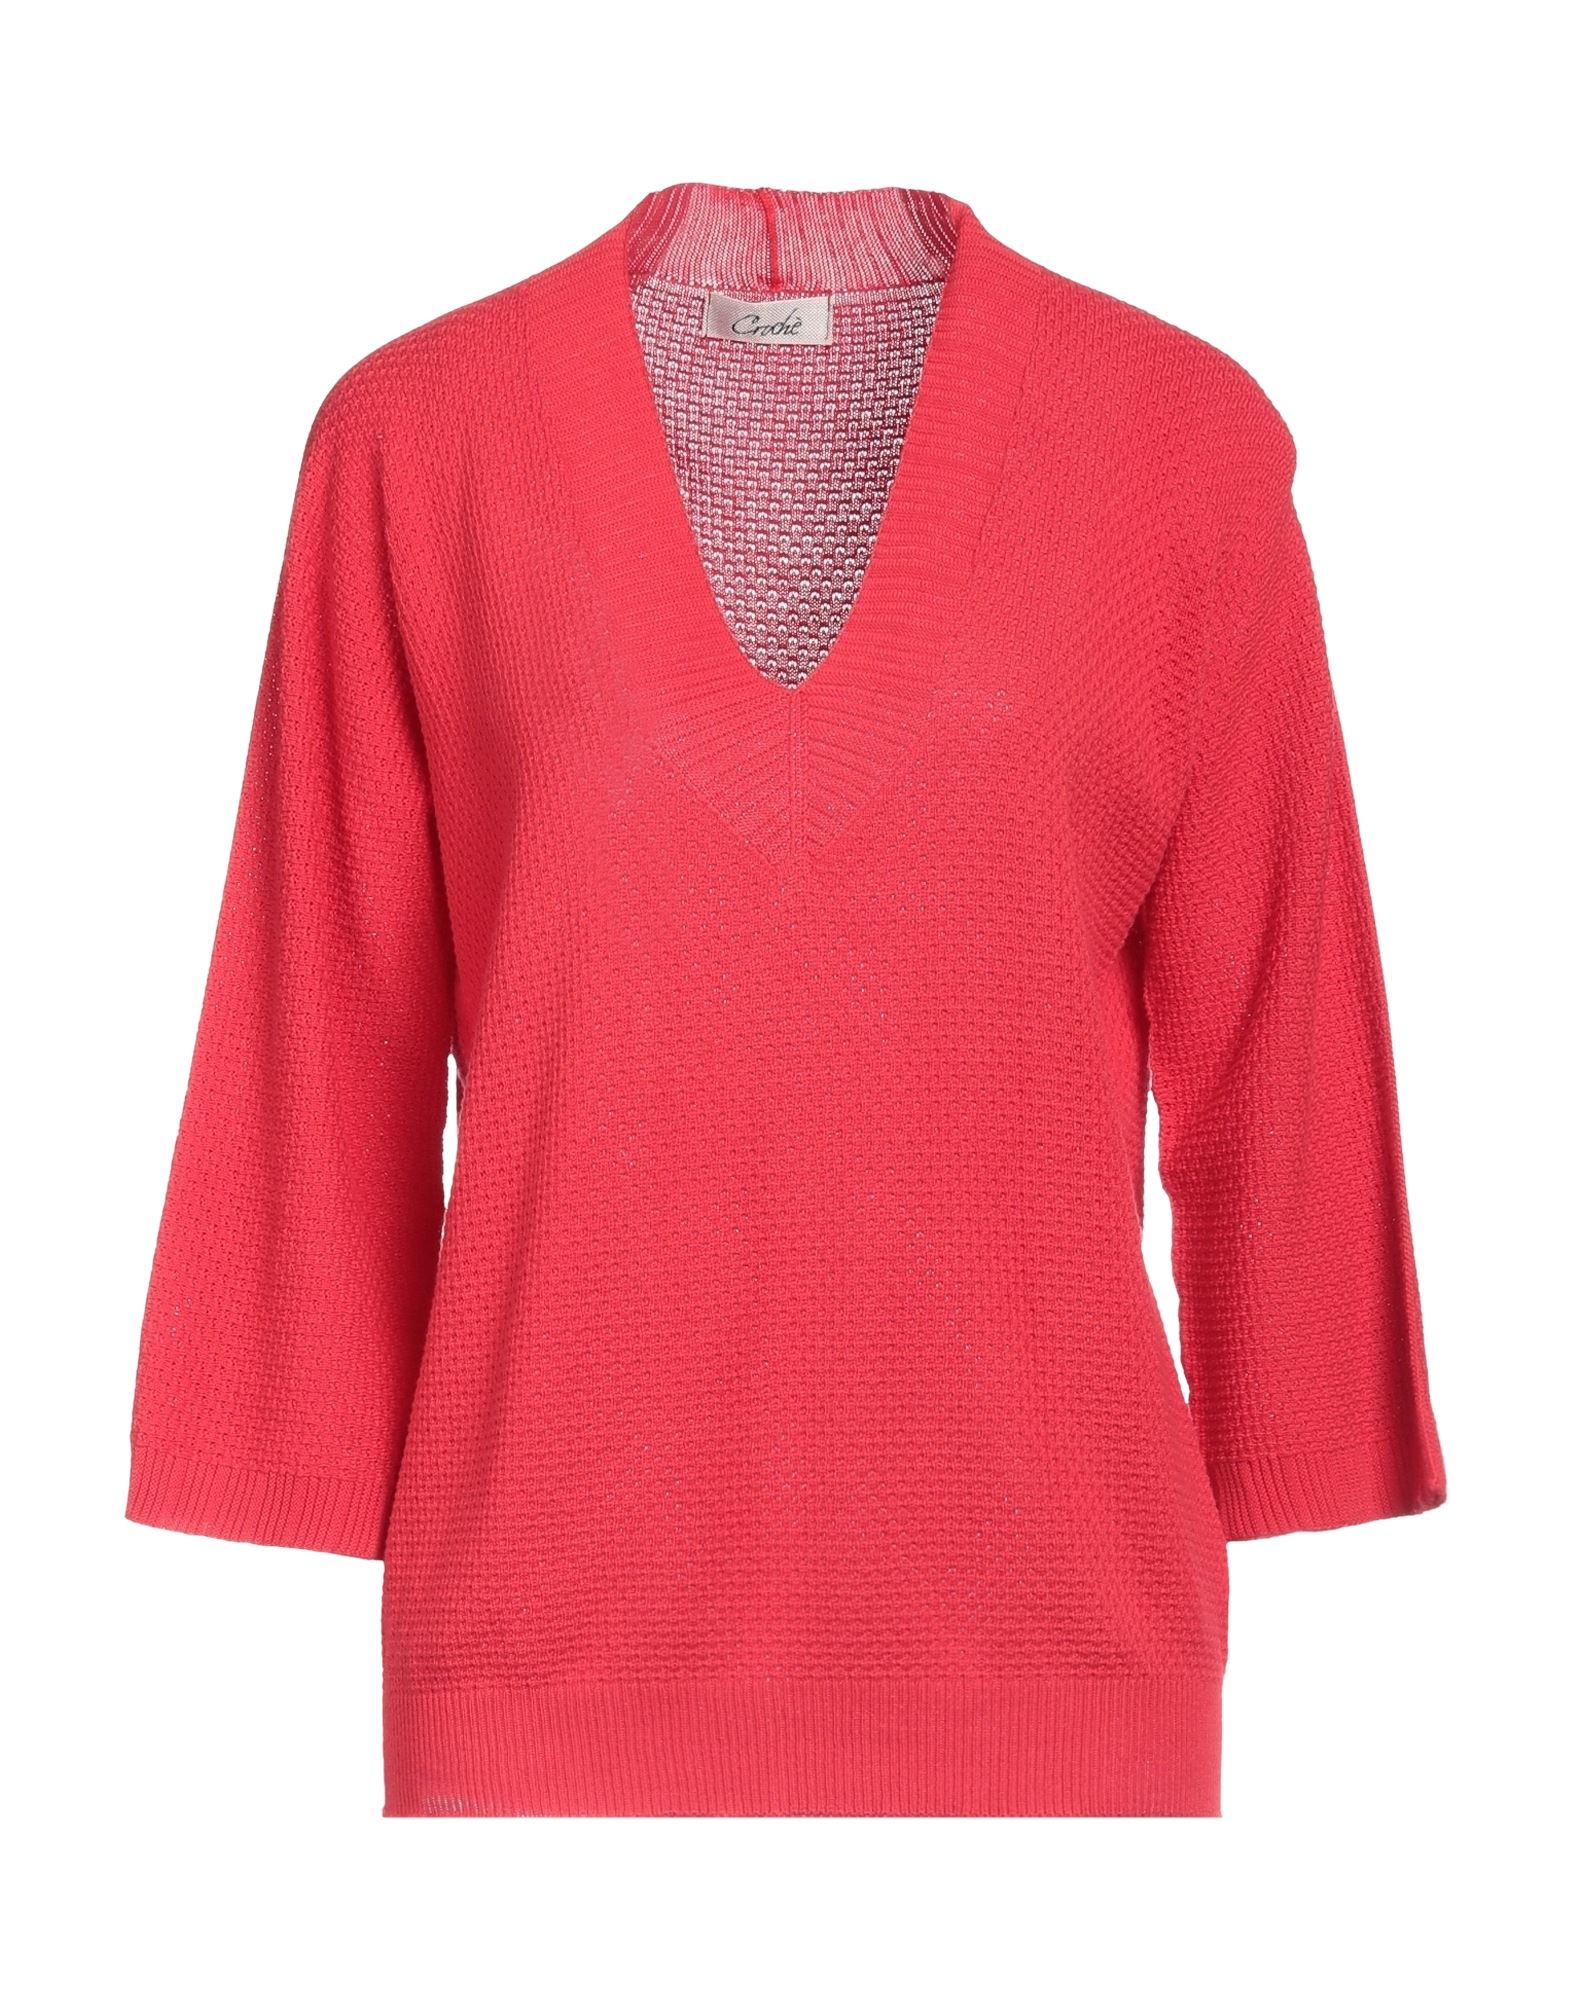 Croche Sweaters In Red